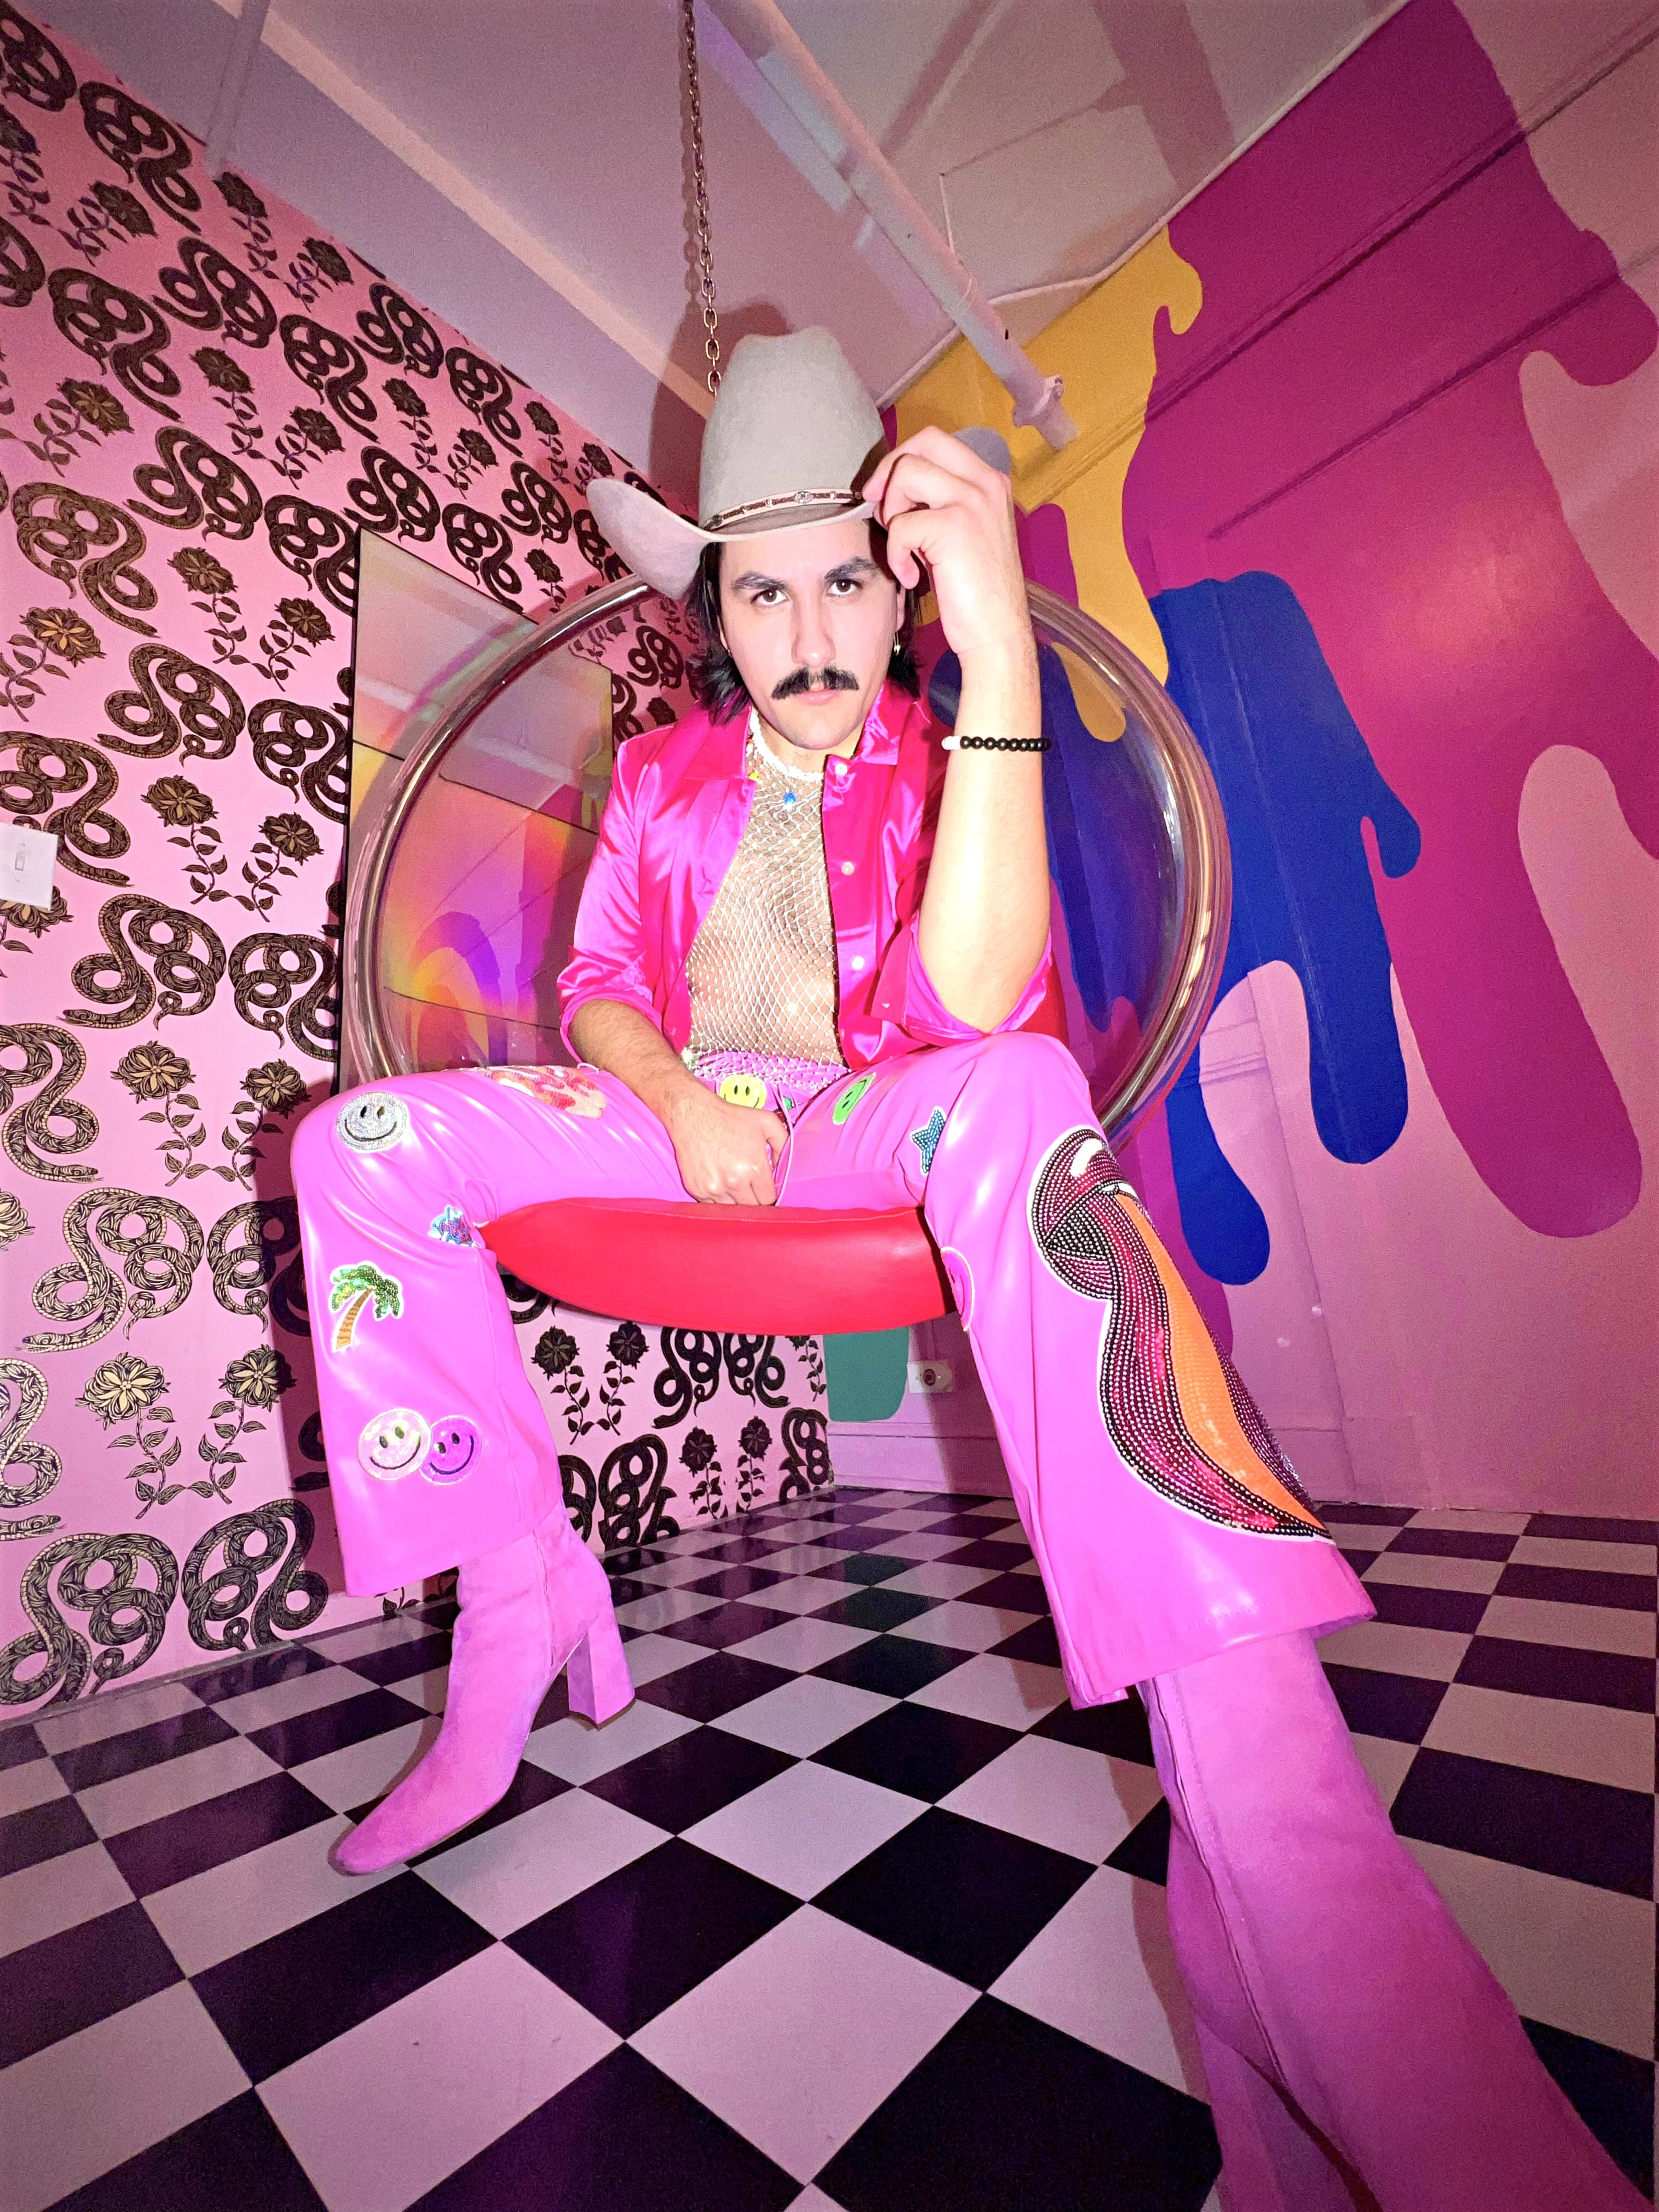 A cowboy sitting in a chair with a pink outfit and a hat on.